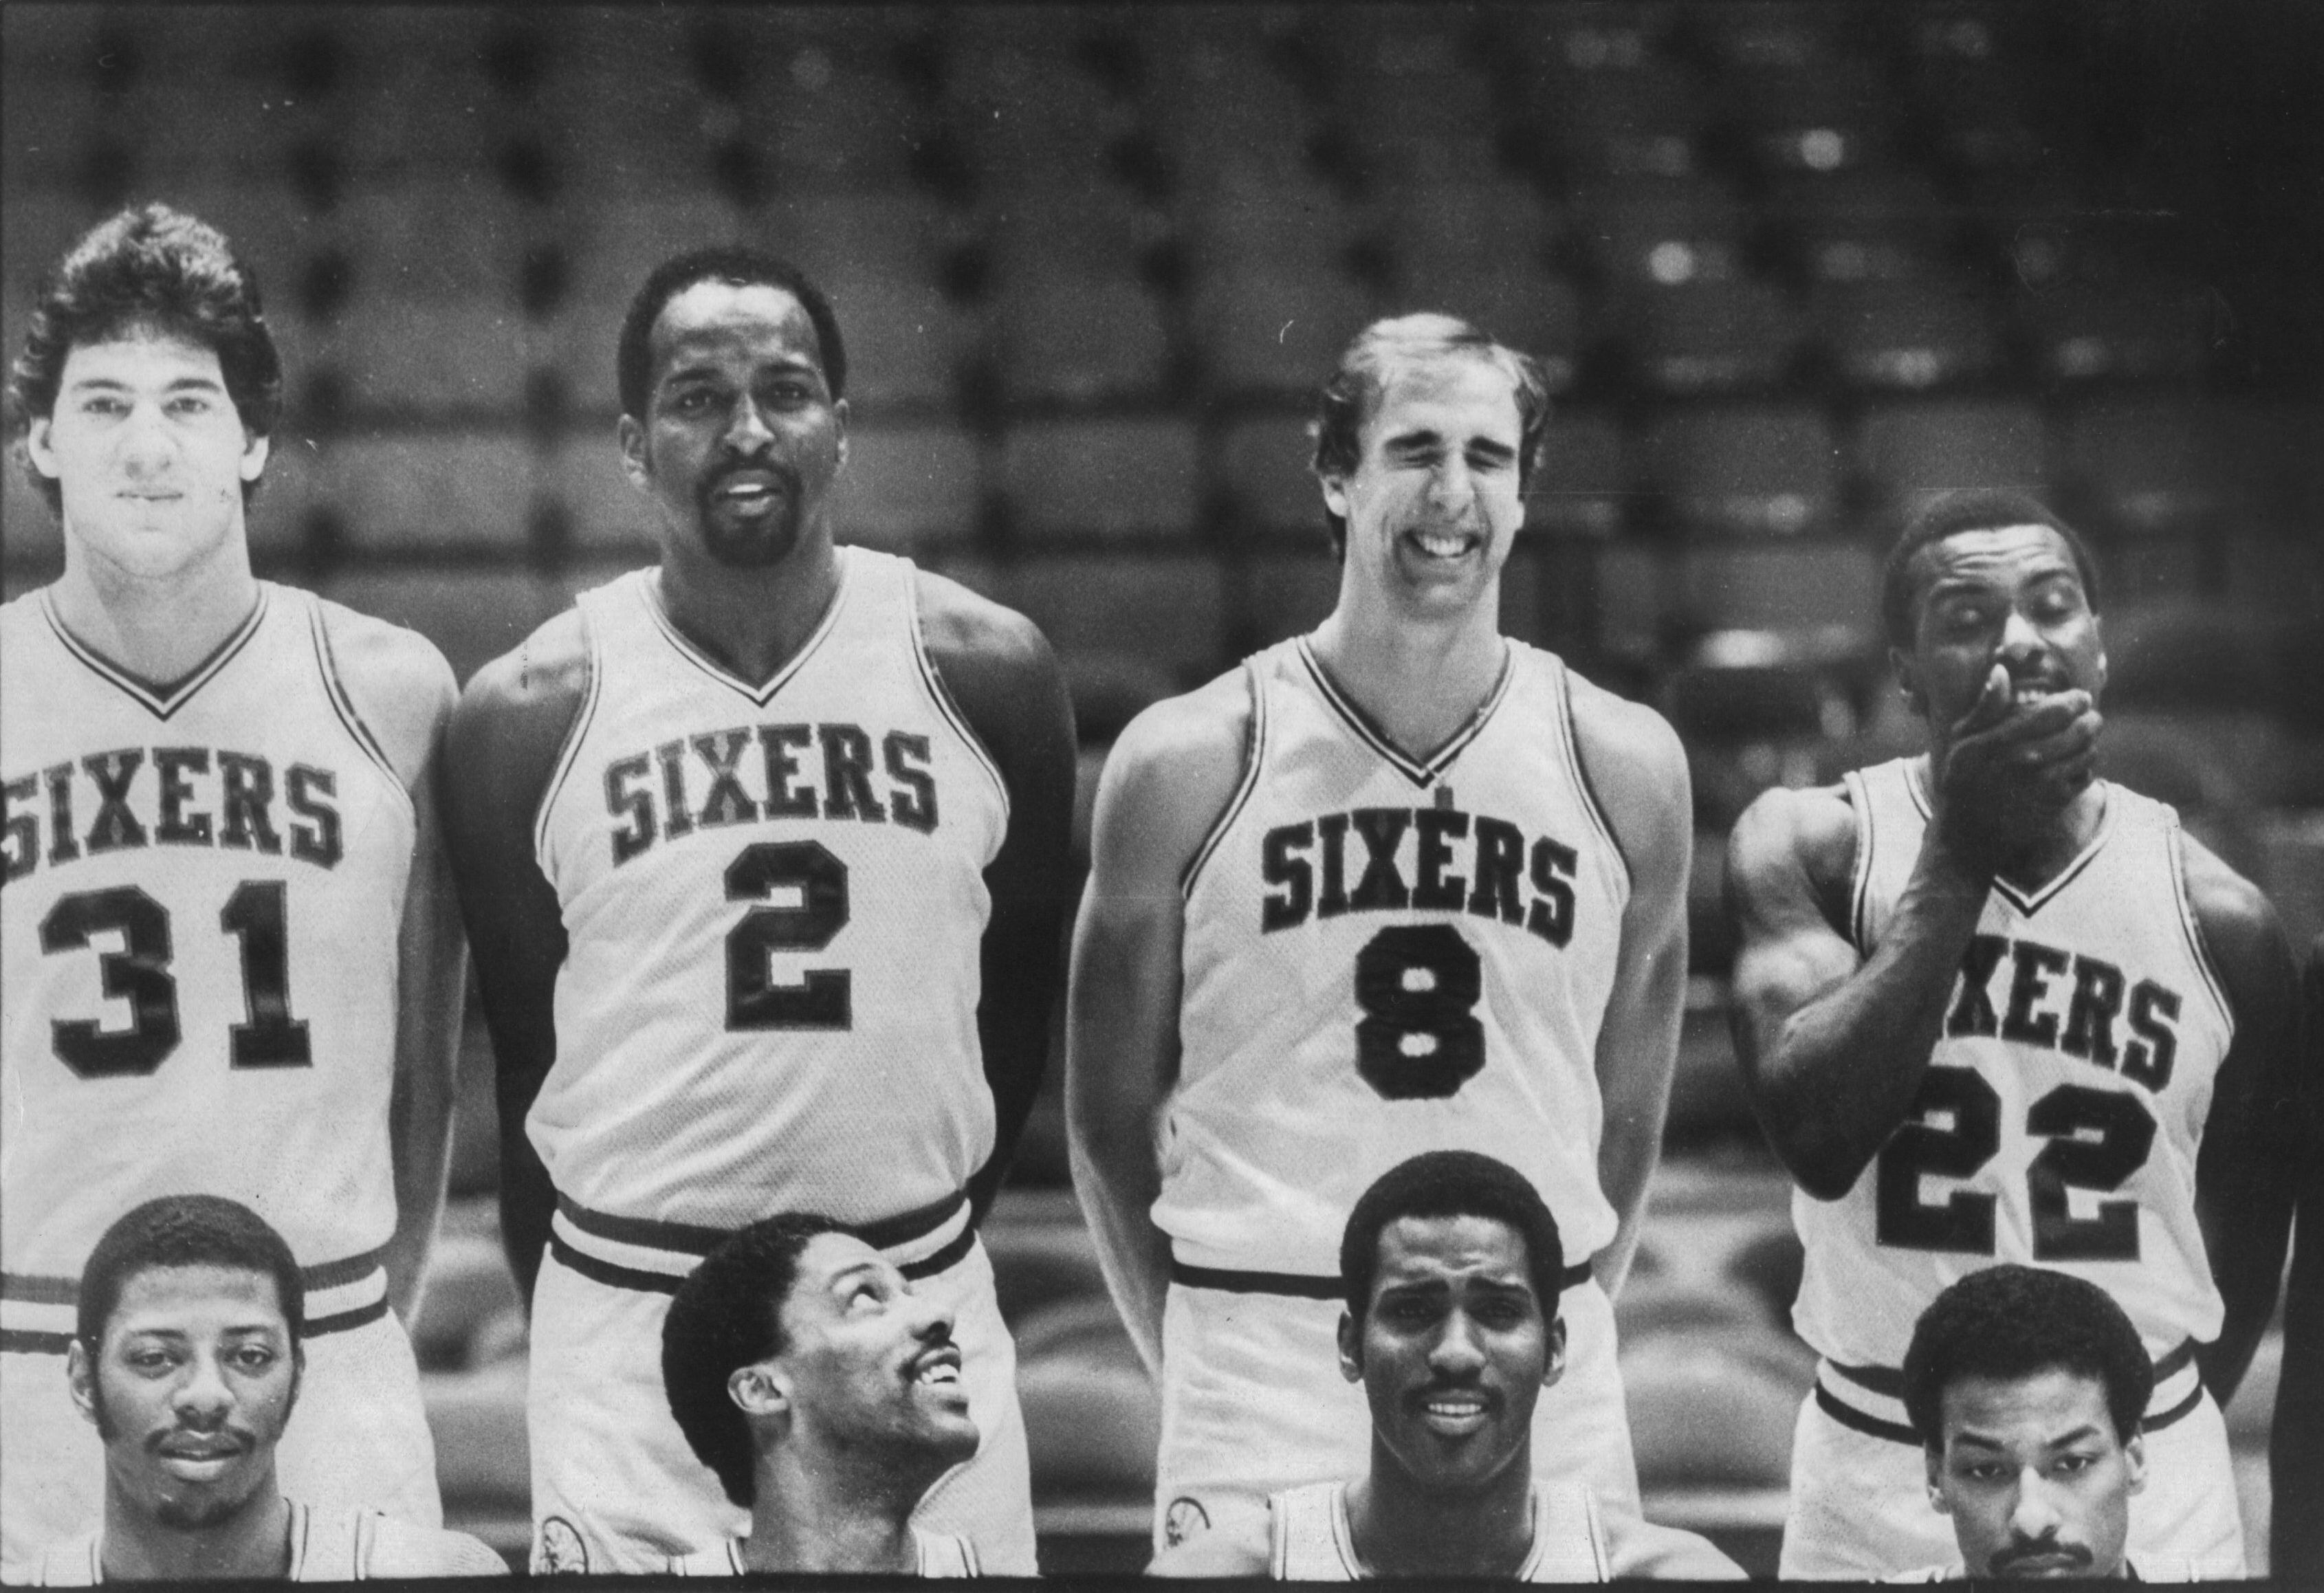 Sixers 1982-83 Championship team gathers for 40th anniversary - WHYY